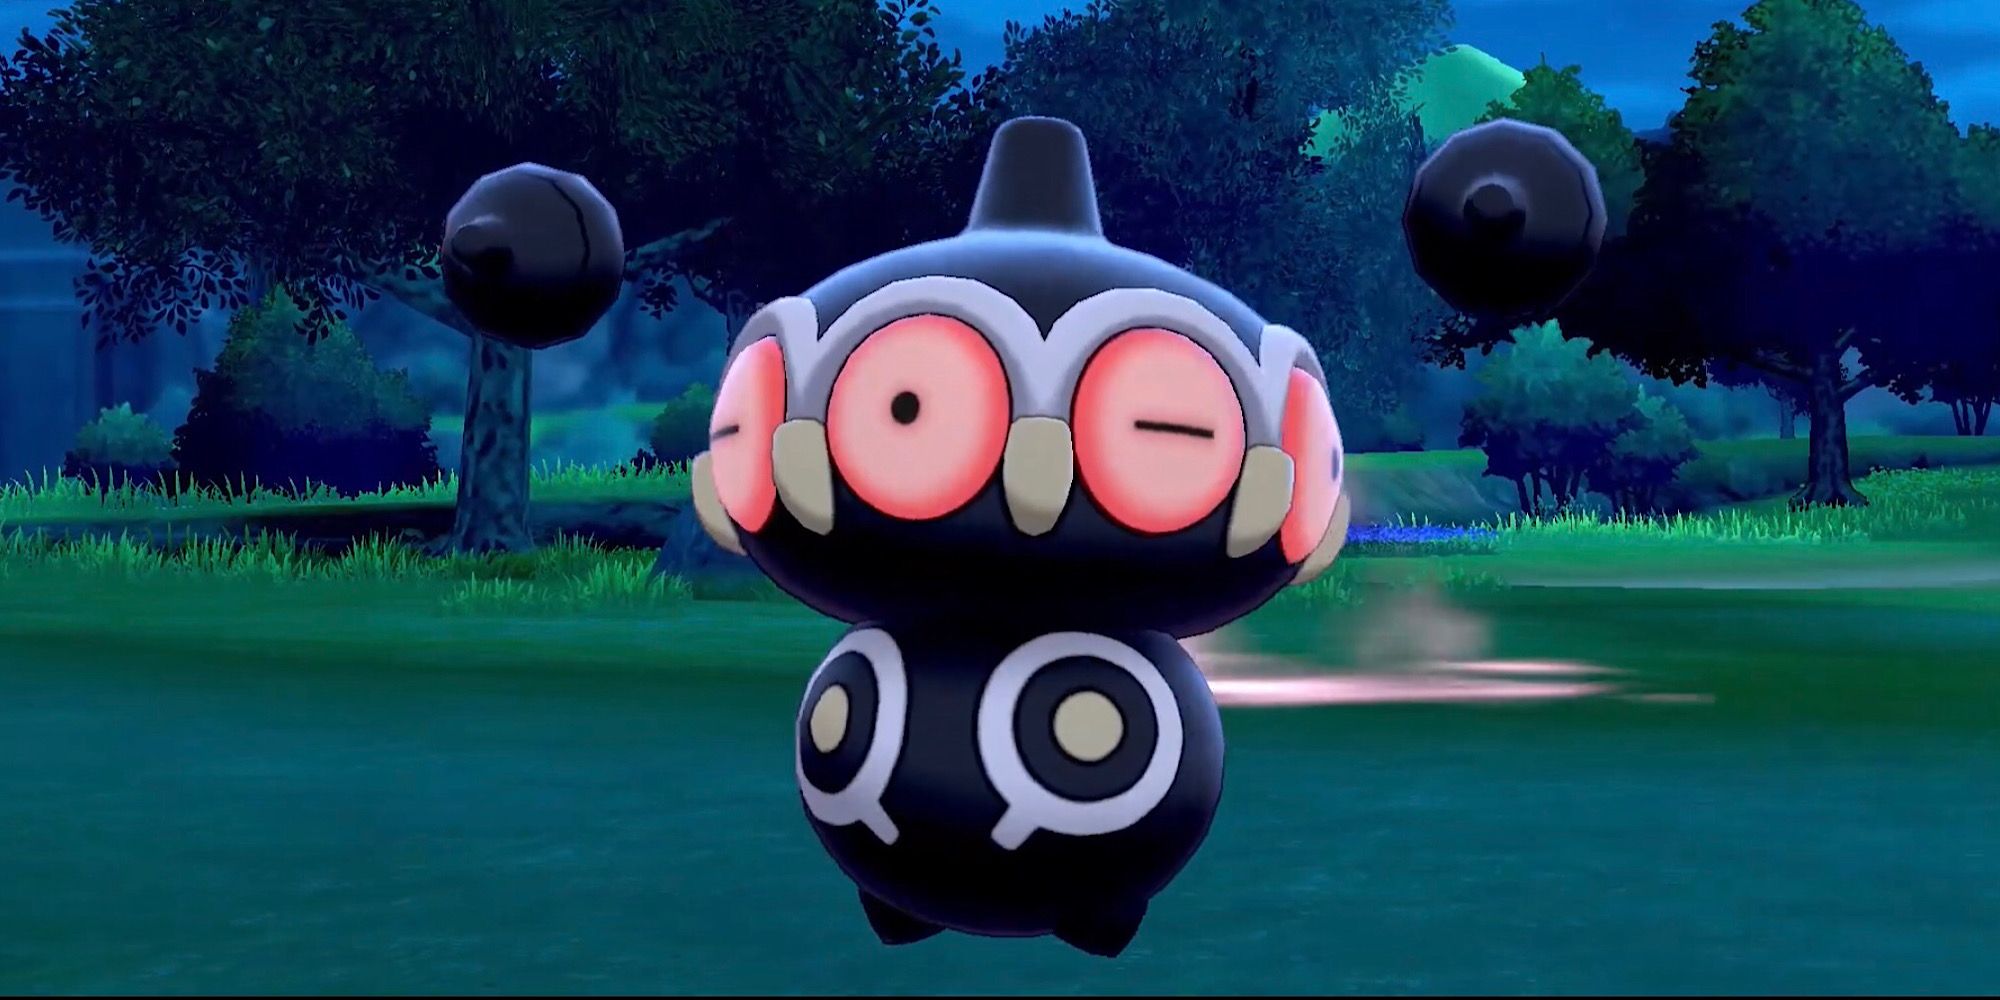 Claydol Could Be History's Oldest Pokémon Sword &amp; Shield wild encounter